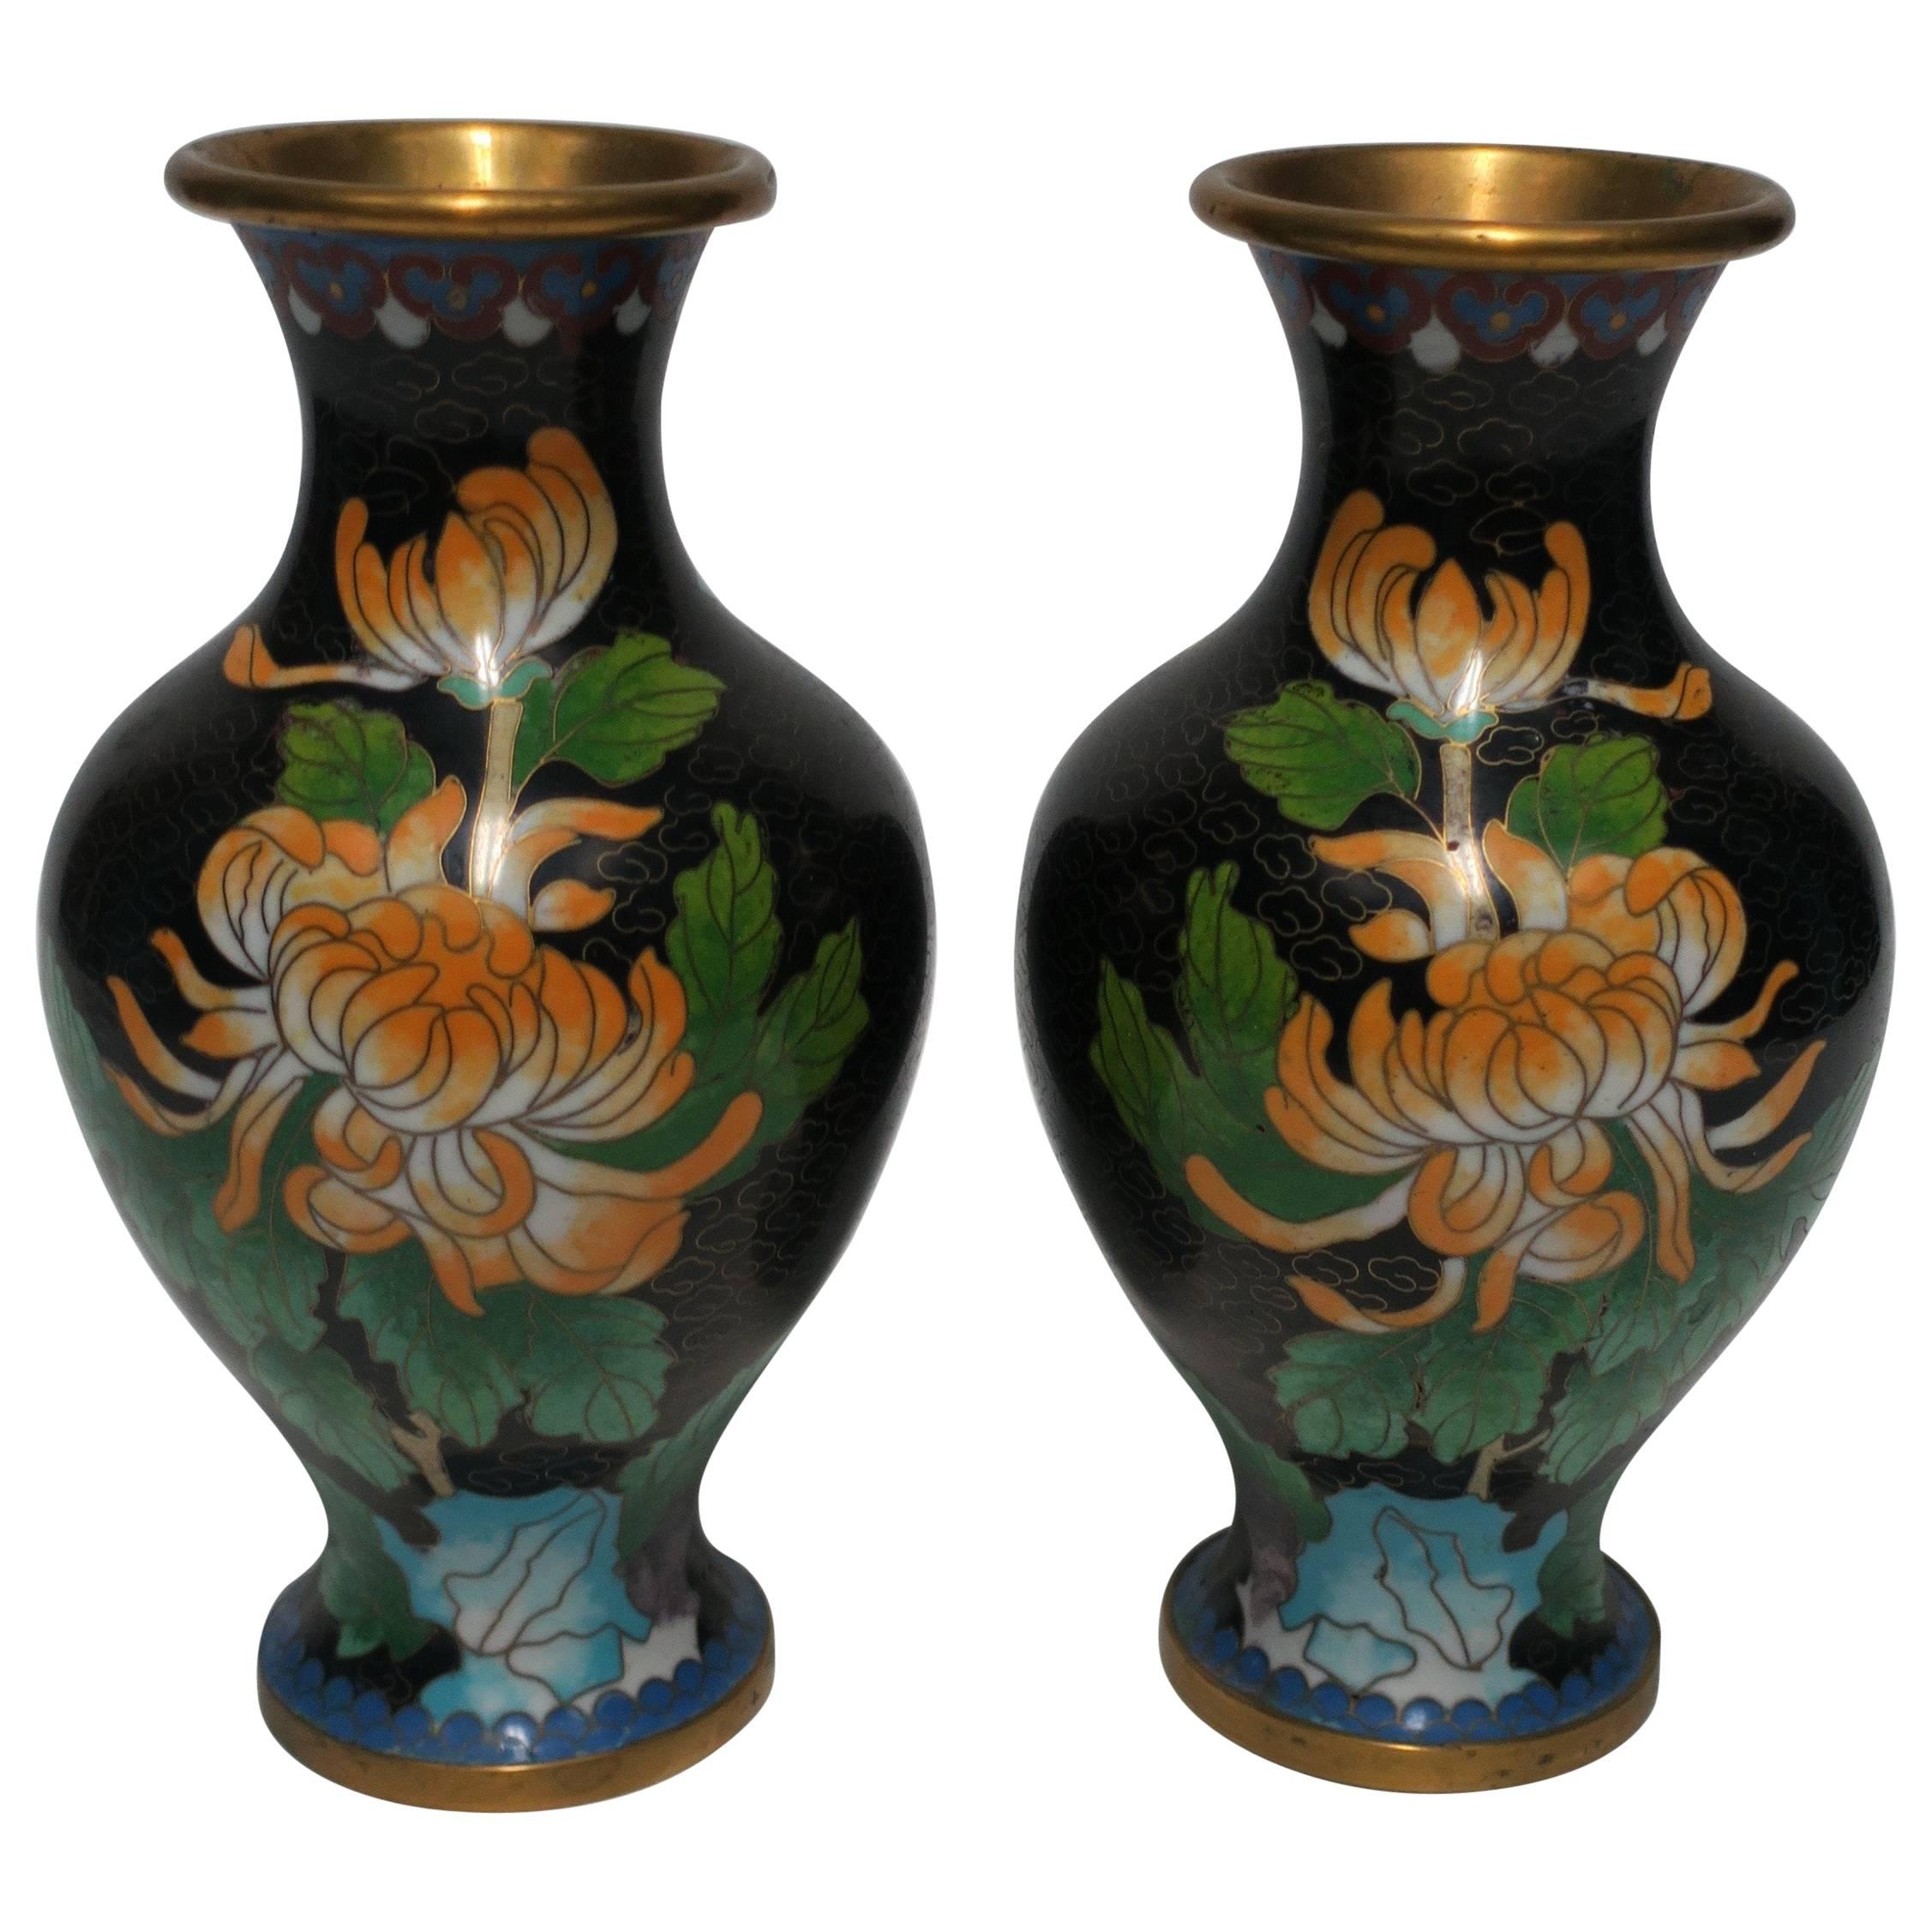 Black and Green Cloisonné́ Enamel and Brass Flower Vases, Pair For Sale 7